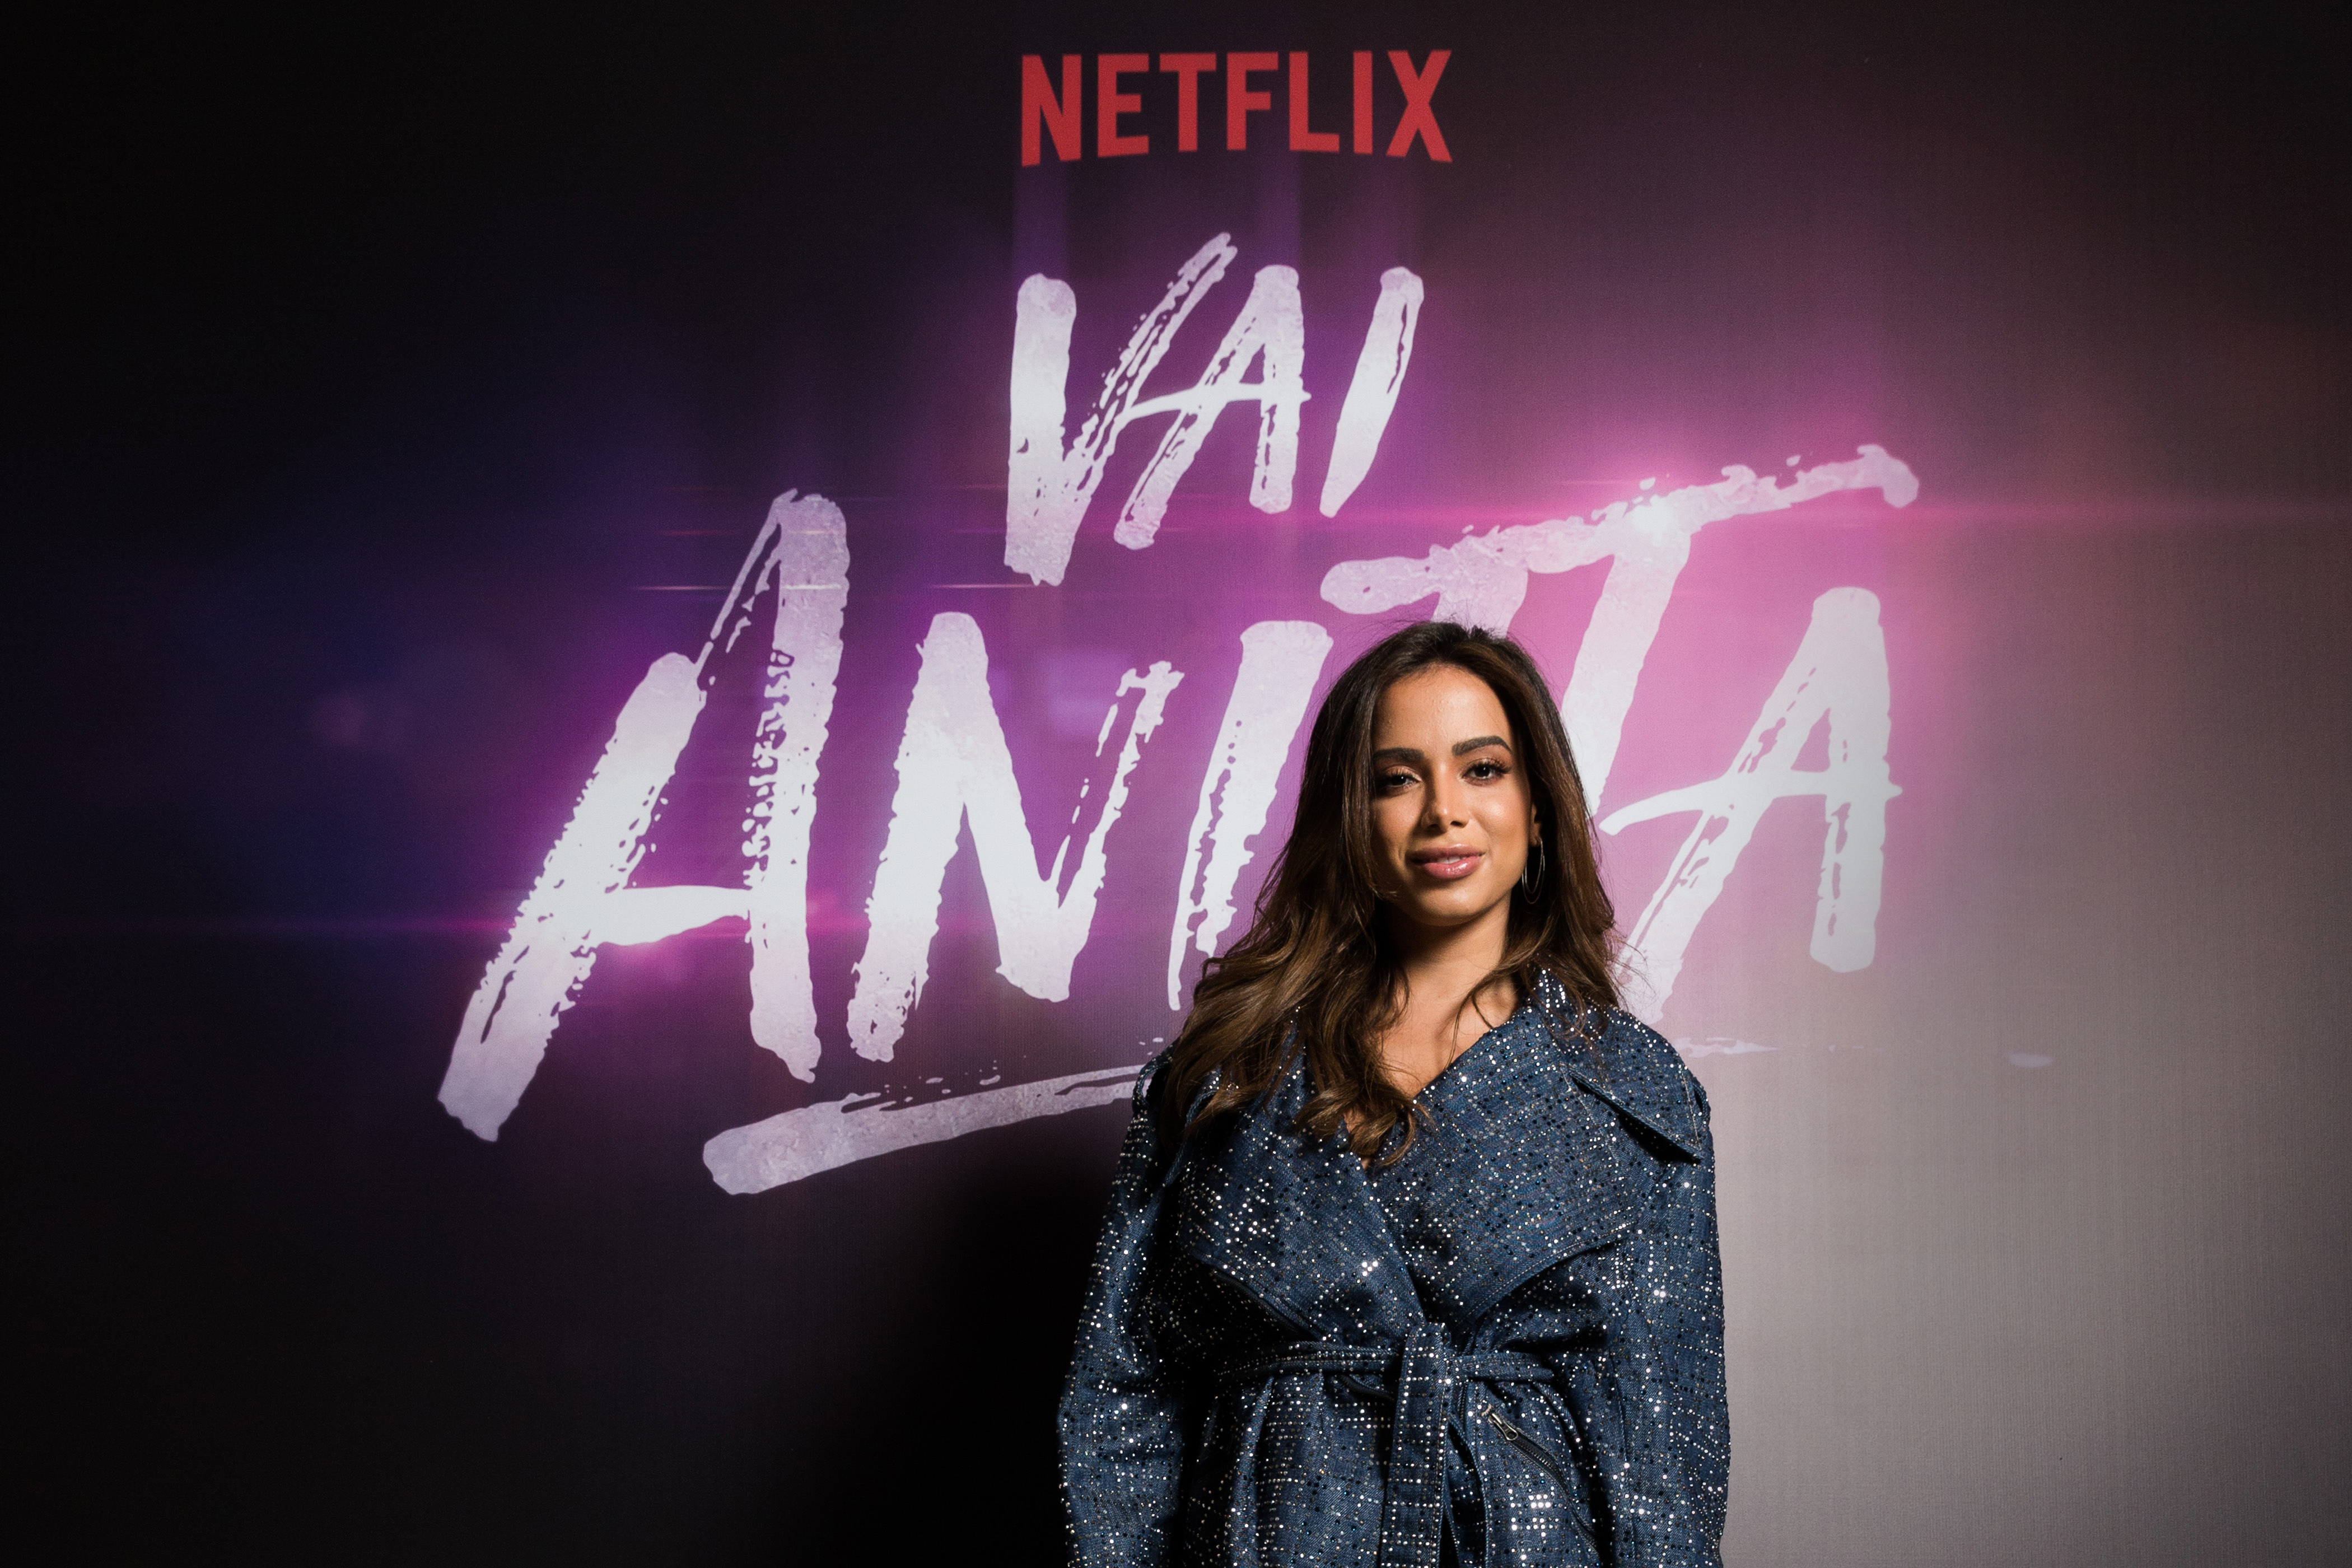 Anitta attends the Netflix "Vai, Anitta!" Press Conference on November 12, 2018, in Sao Paulo, Brazil. | Source: Getty Images